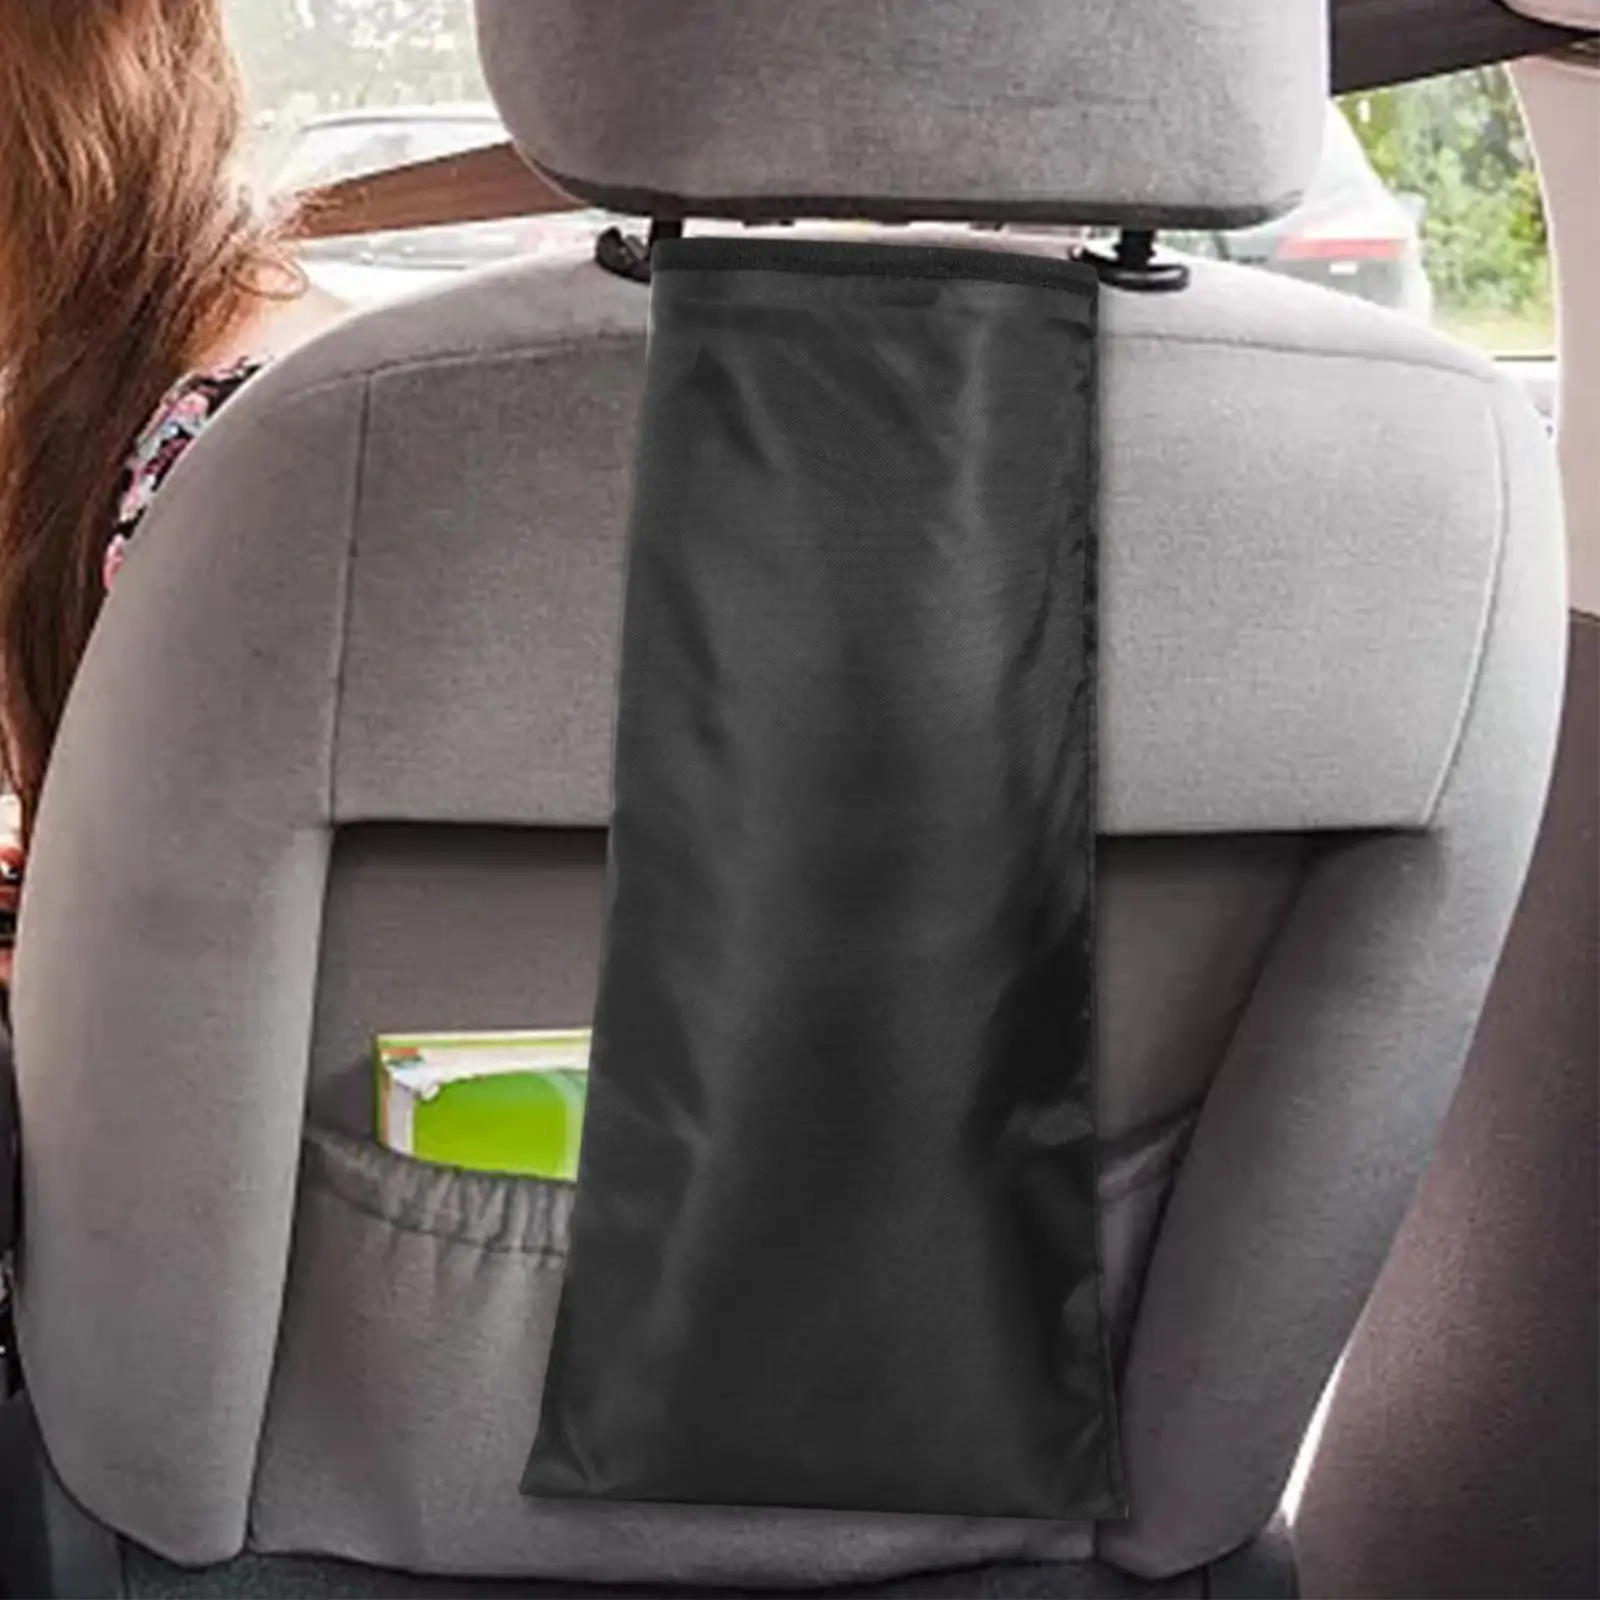 Car Trash Bag Detachable Waterproof Oxford Material Hanging Reusable Vehicle Garbage Can for Outdoor Traveling Home Use